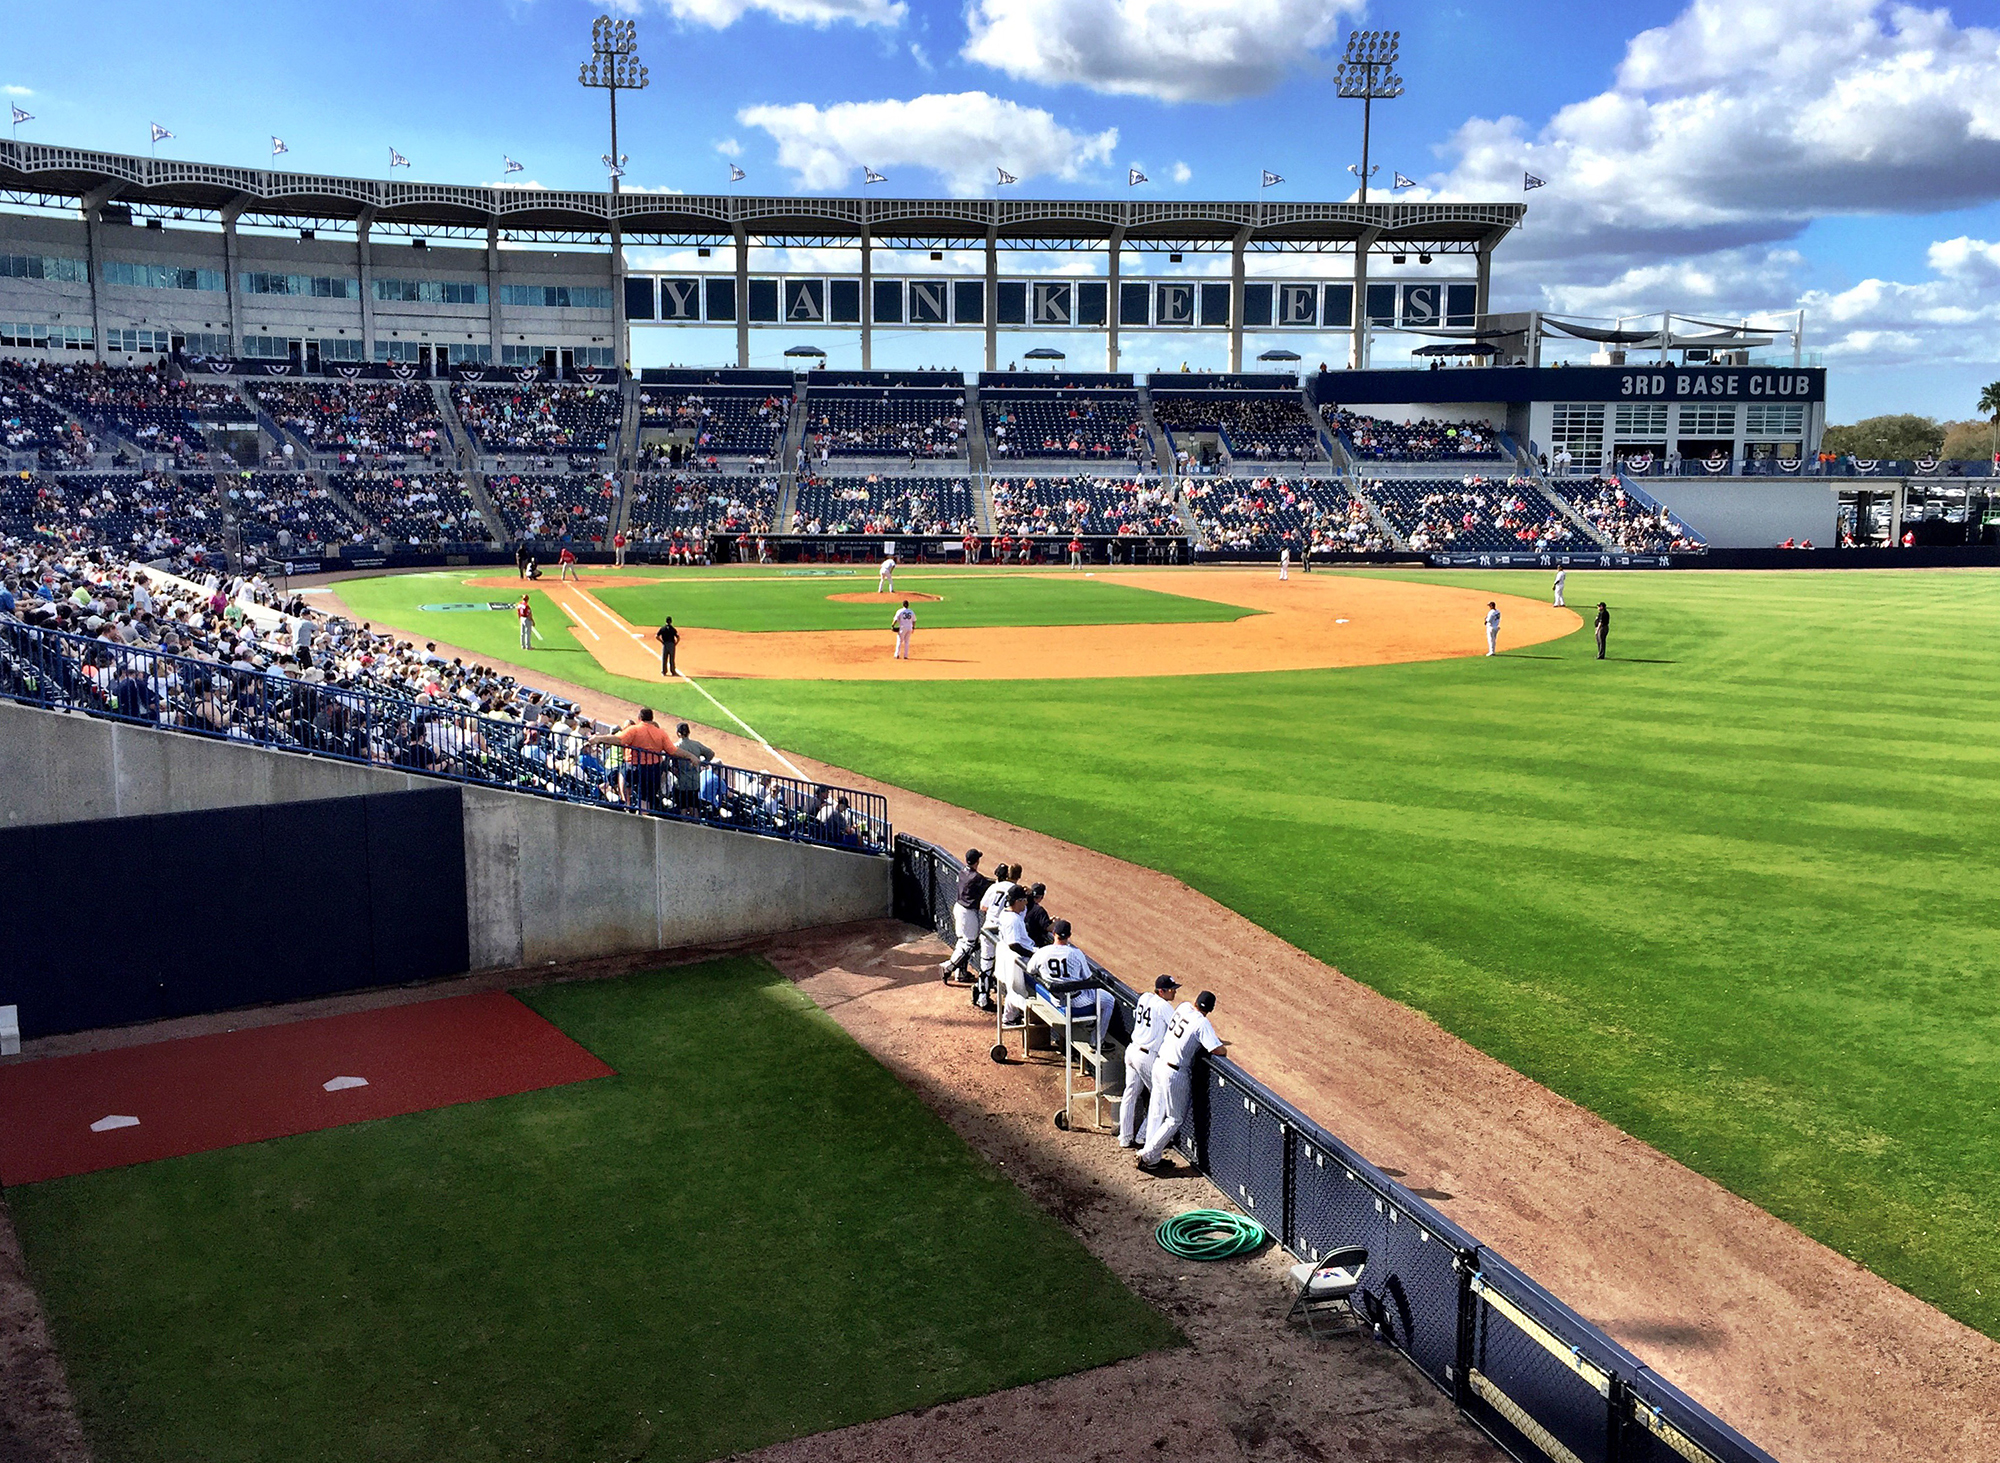 George M. Steinbrenner Field, Spring Training home of the New York